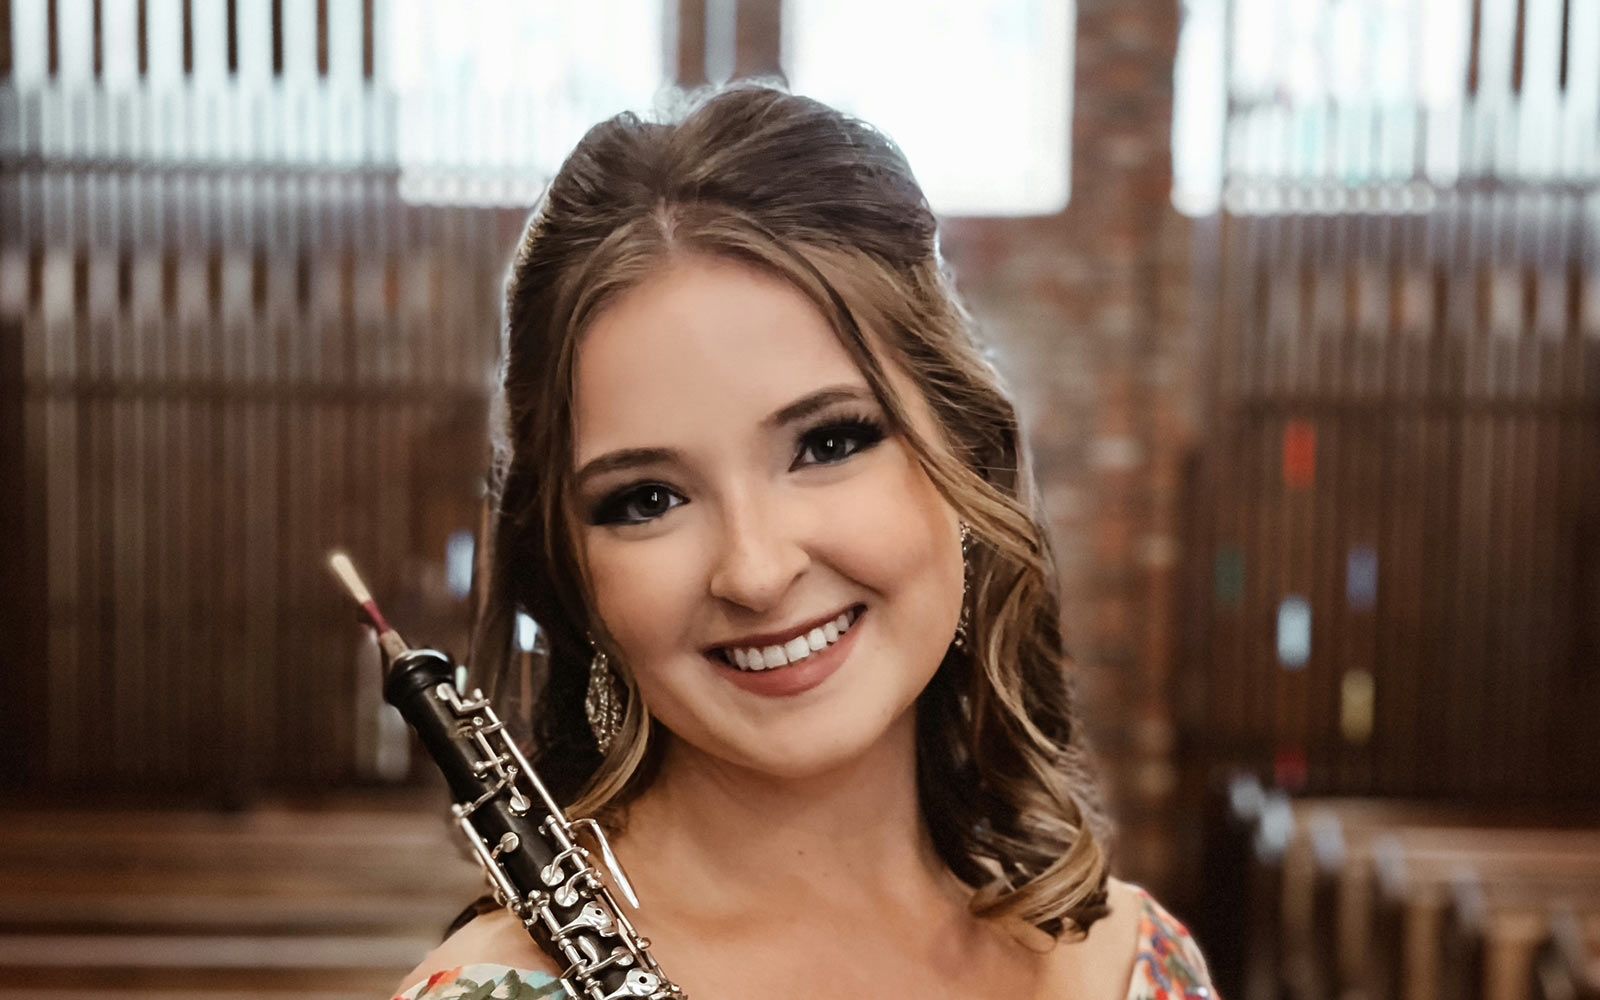  Accomplished student oboist set to perform at MSU Ragtime and Jazz Festival as Docher Award honoree 